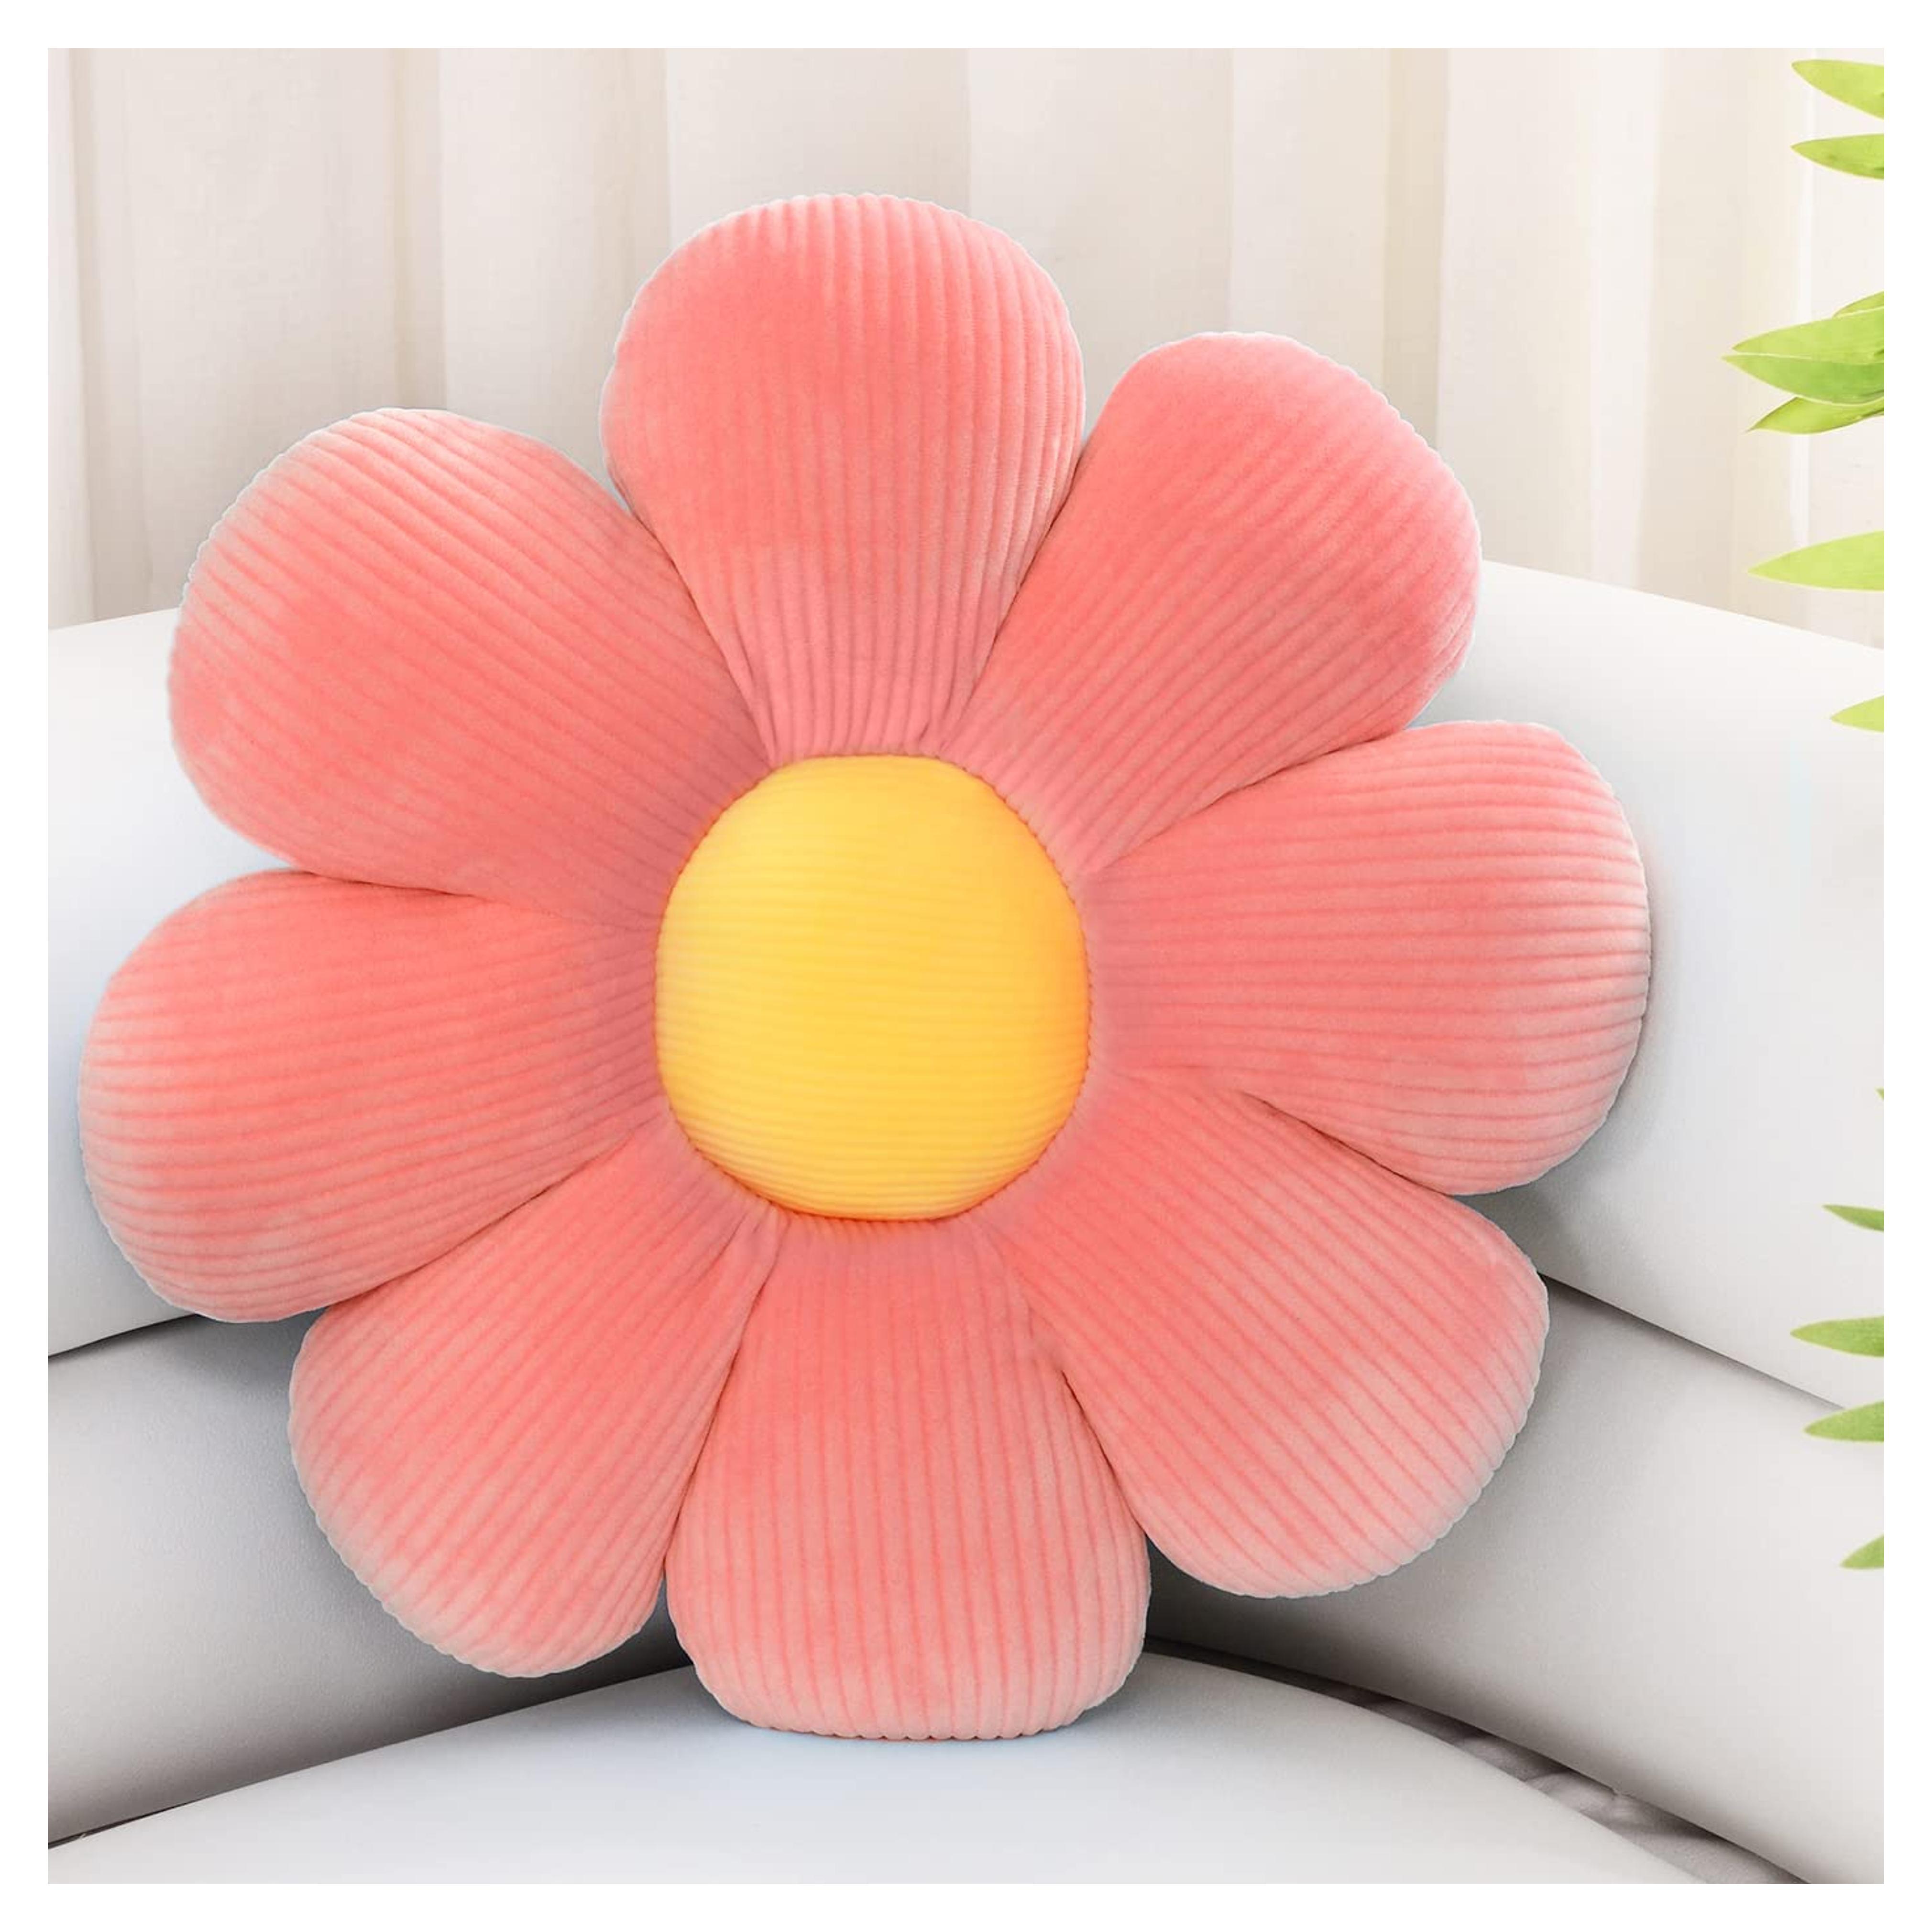 ZAKUN Flower- Shaped Throw Pillow, Daisy Pillow Flower Cushion, Aesthetic Daisy Flower Pillow Cute Flower Seating Cushion, Flower Room Décor Pillows for Sofa Couch Bed